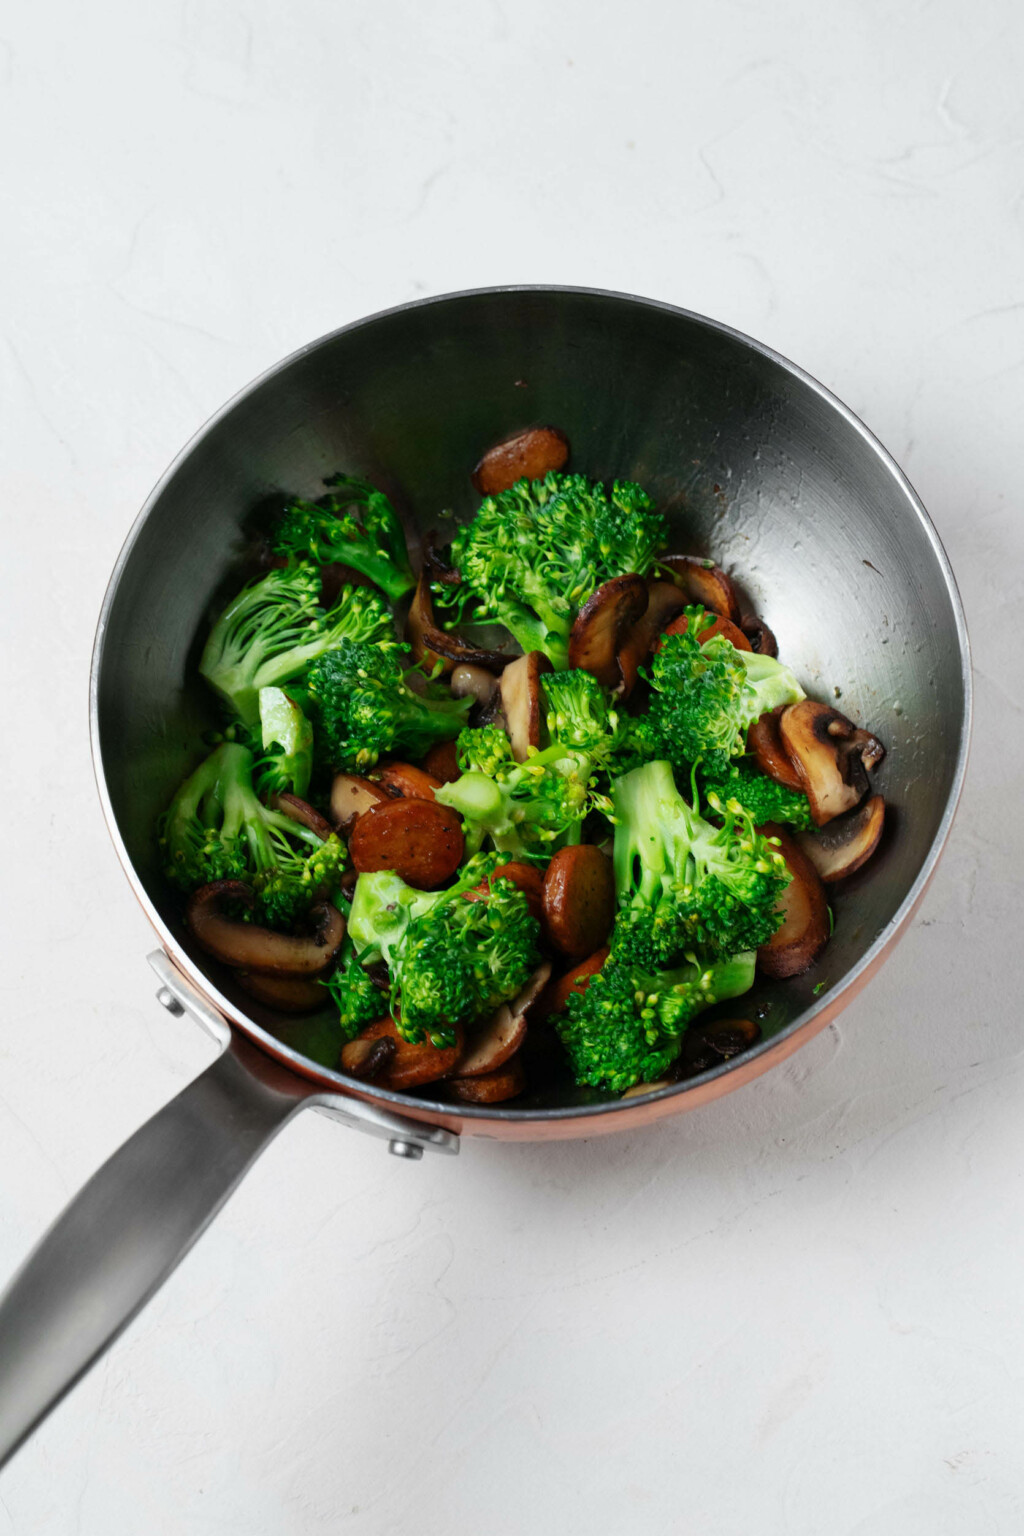 A silver skillet is being used to sauté sliced mushrooms and sausage, along with bright green broccoli florets.